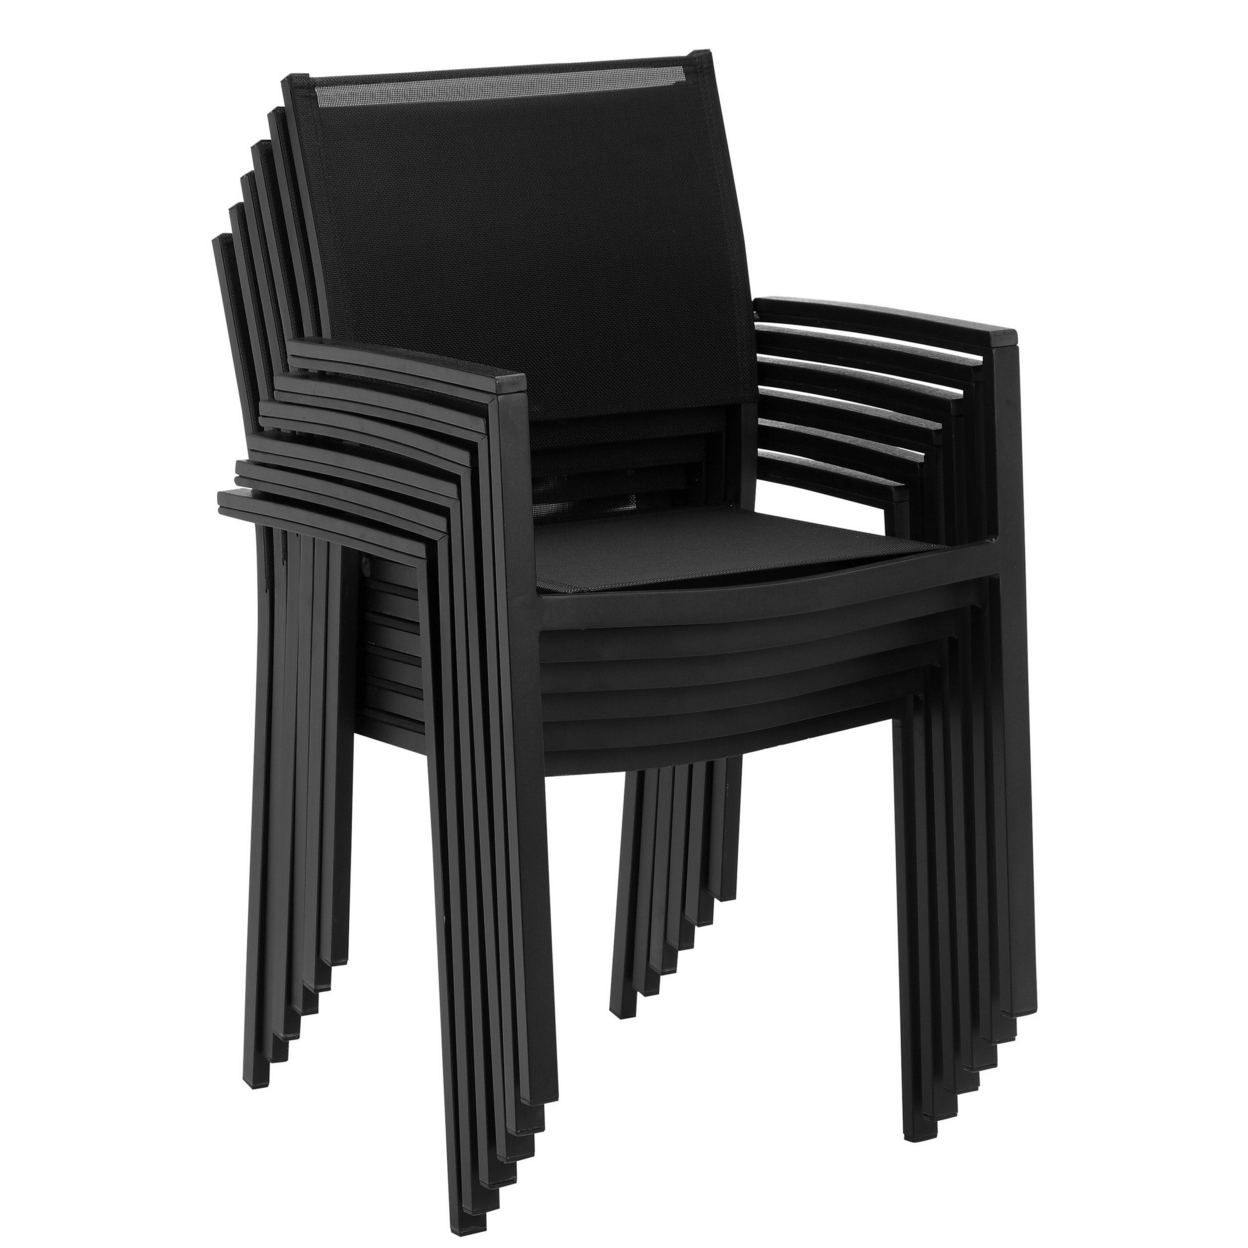 Fifi 21 Inch Set of 6 Dining Chairs, Black Aluminum Frame, Easily Stackable- Saltoro Sherpi - image 1 of 5